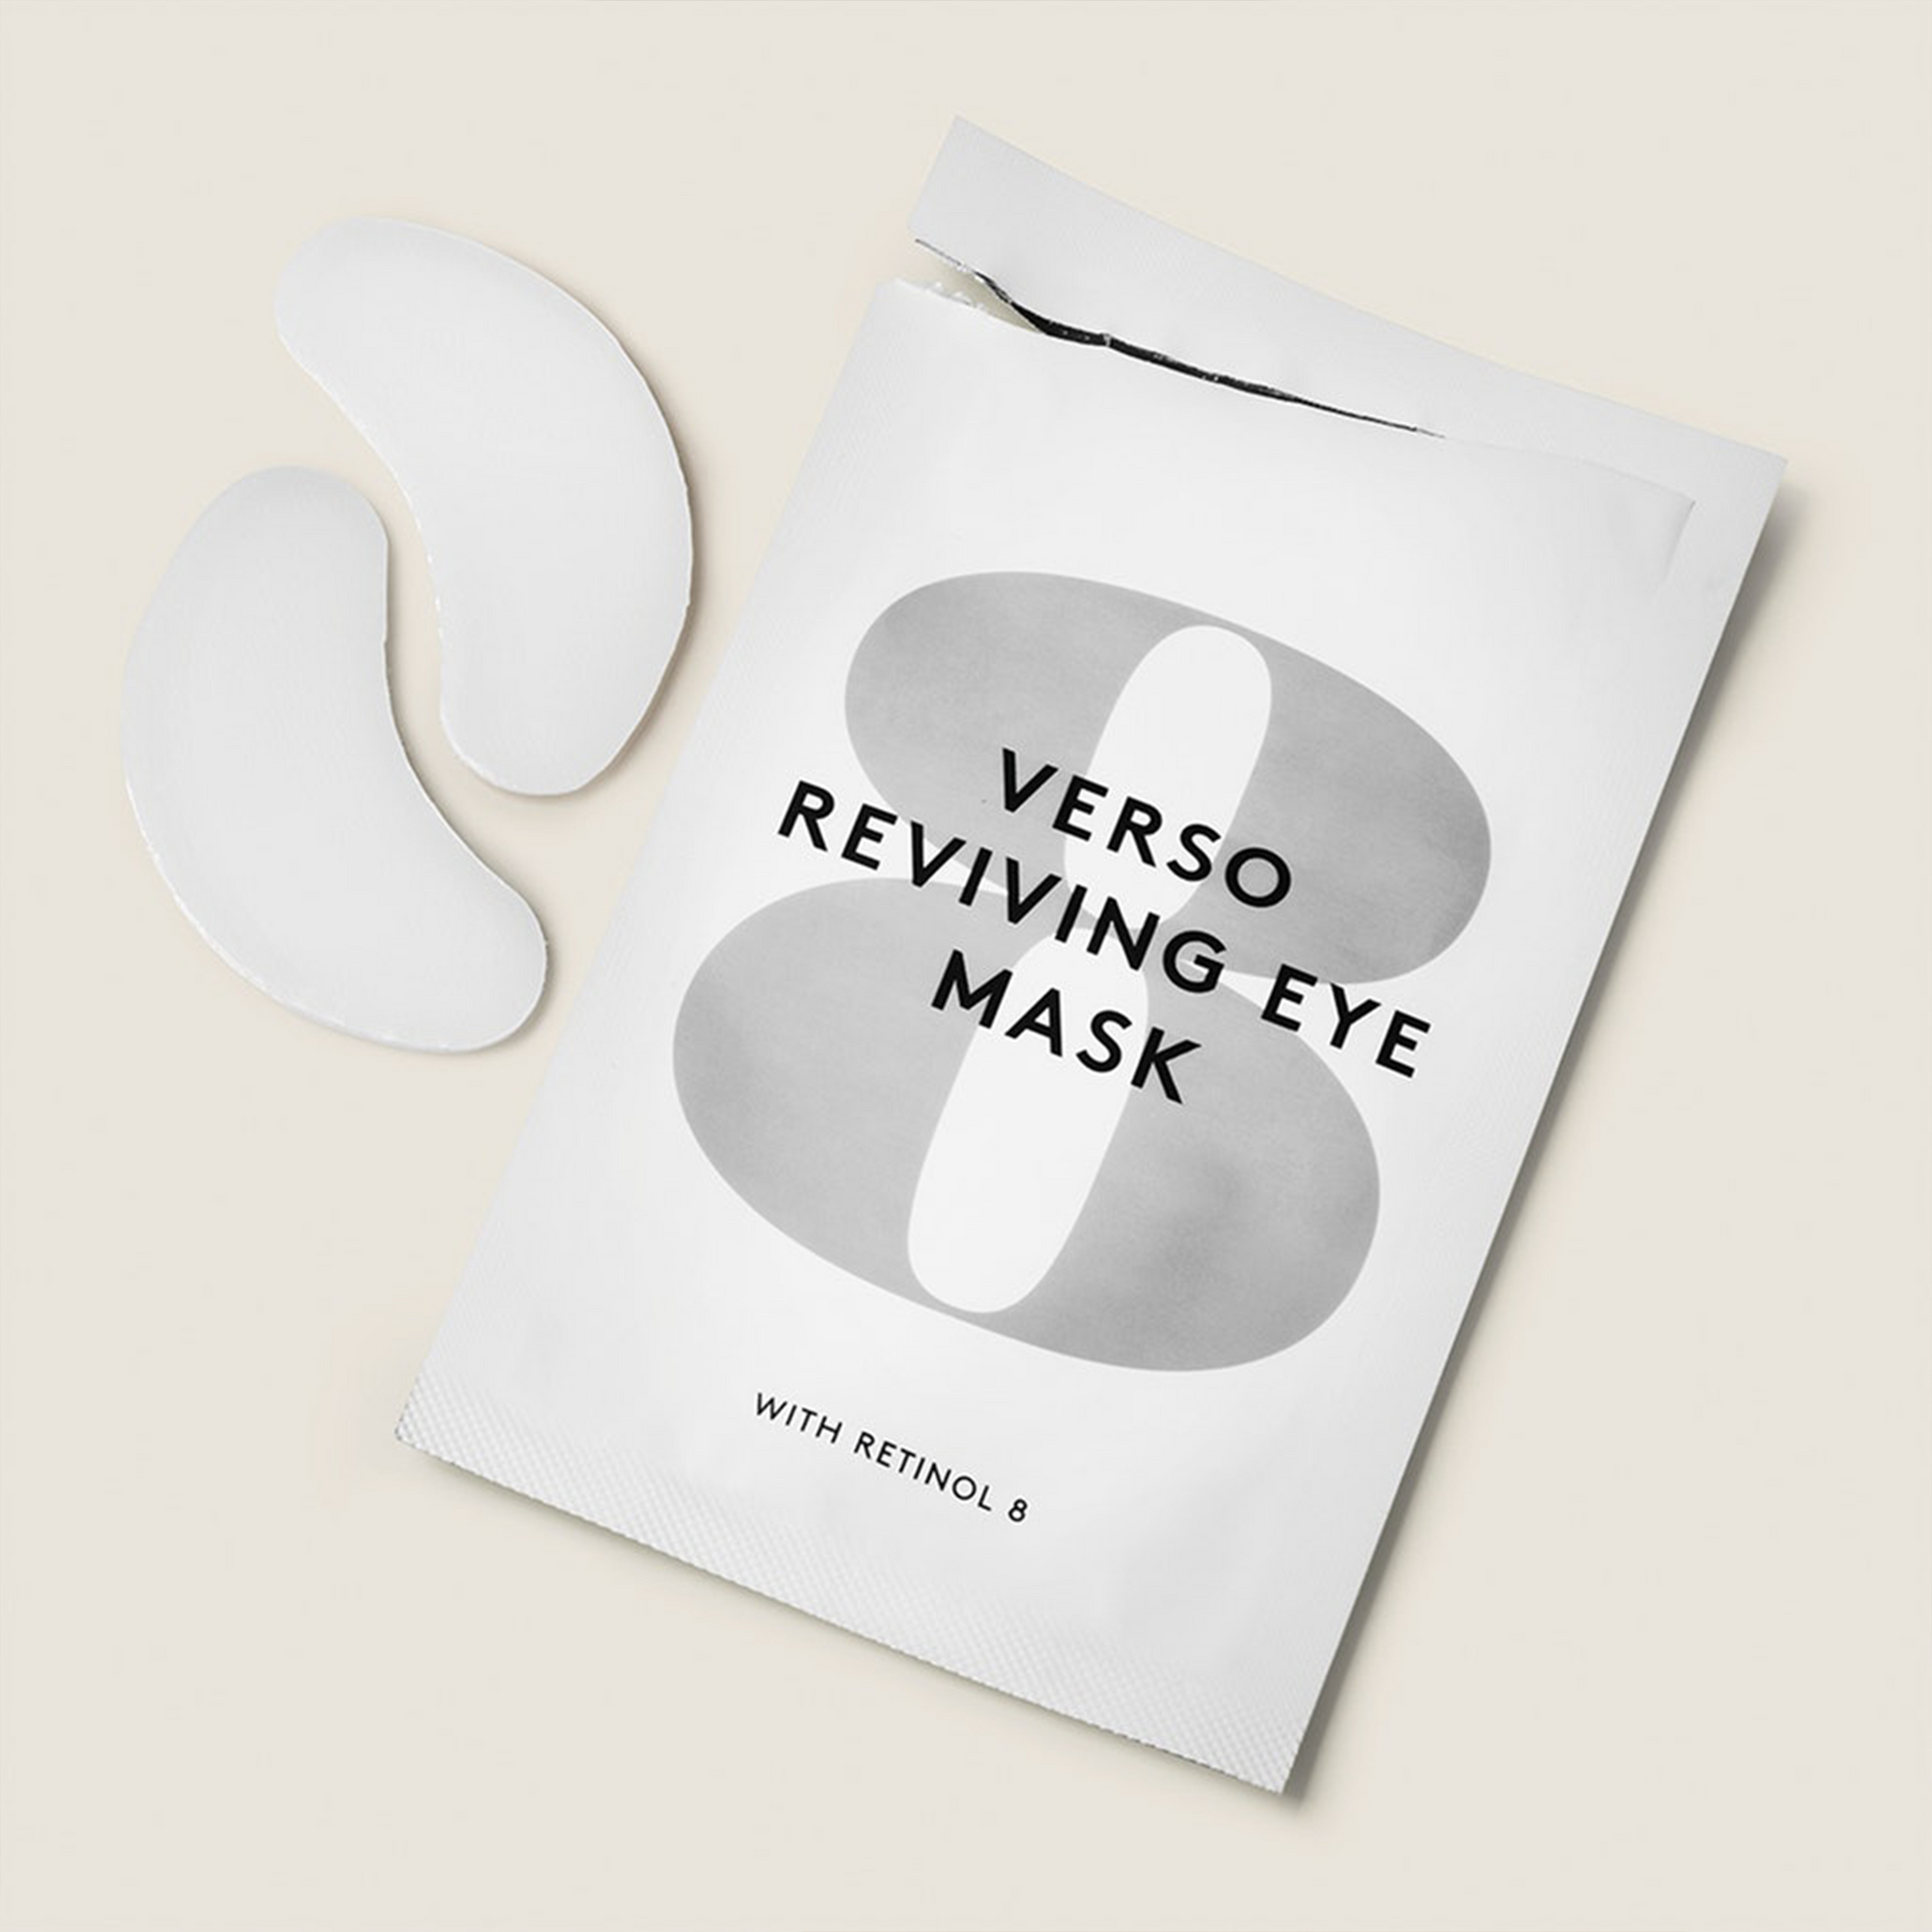 Verso Reviving Eye Mask Single: Verso Reviving Eye Mask is a moisturizing hydrogel mask that provides energy to the delicate skin around the eyes. A hydrating mask to minimize the appearance of fine lines and dehydrated skin. Leaving the delicate area around the eyes looking softer, smoother, and visibly firmer. Verso Reviving Eye Mask is a hydrogel sheet mask.